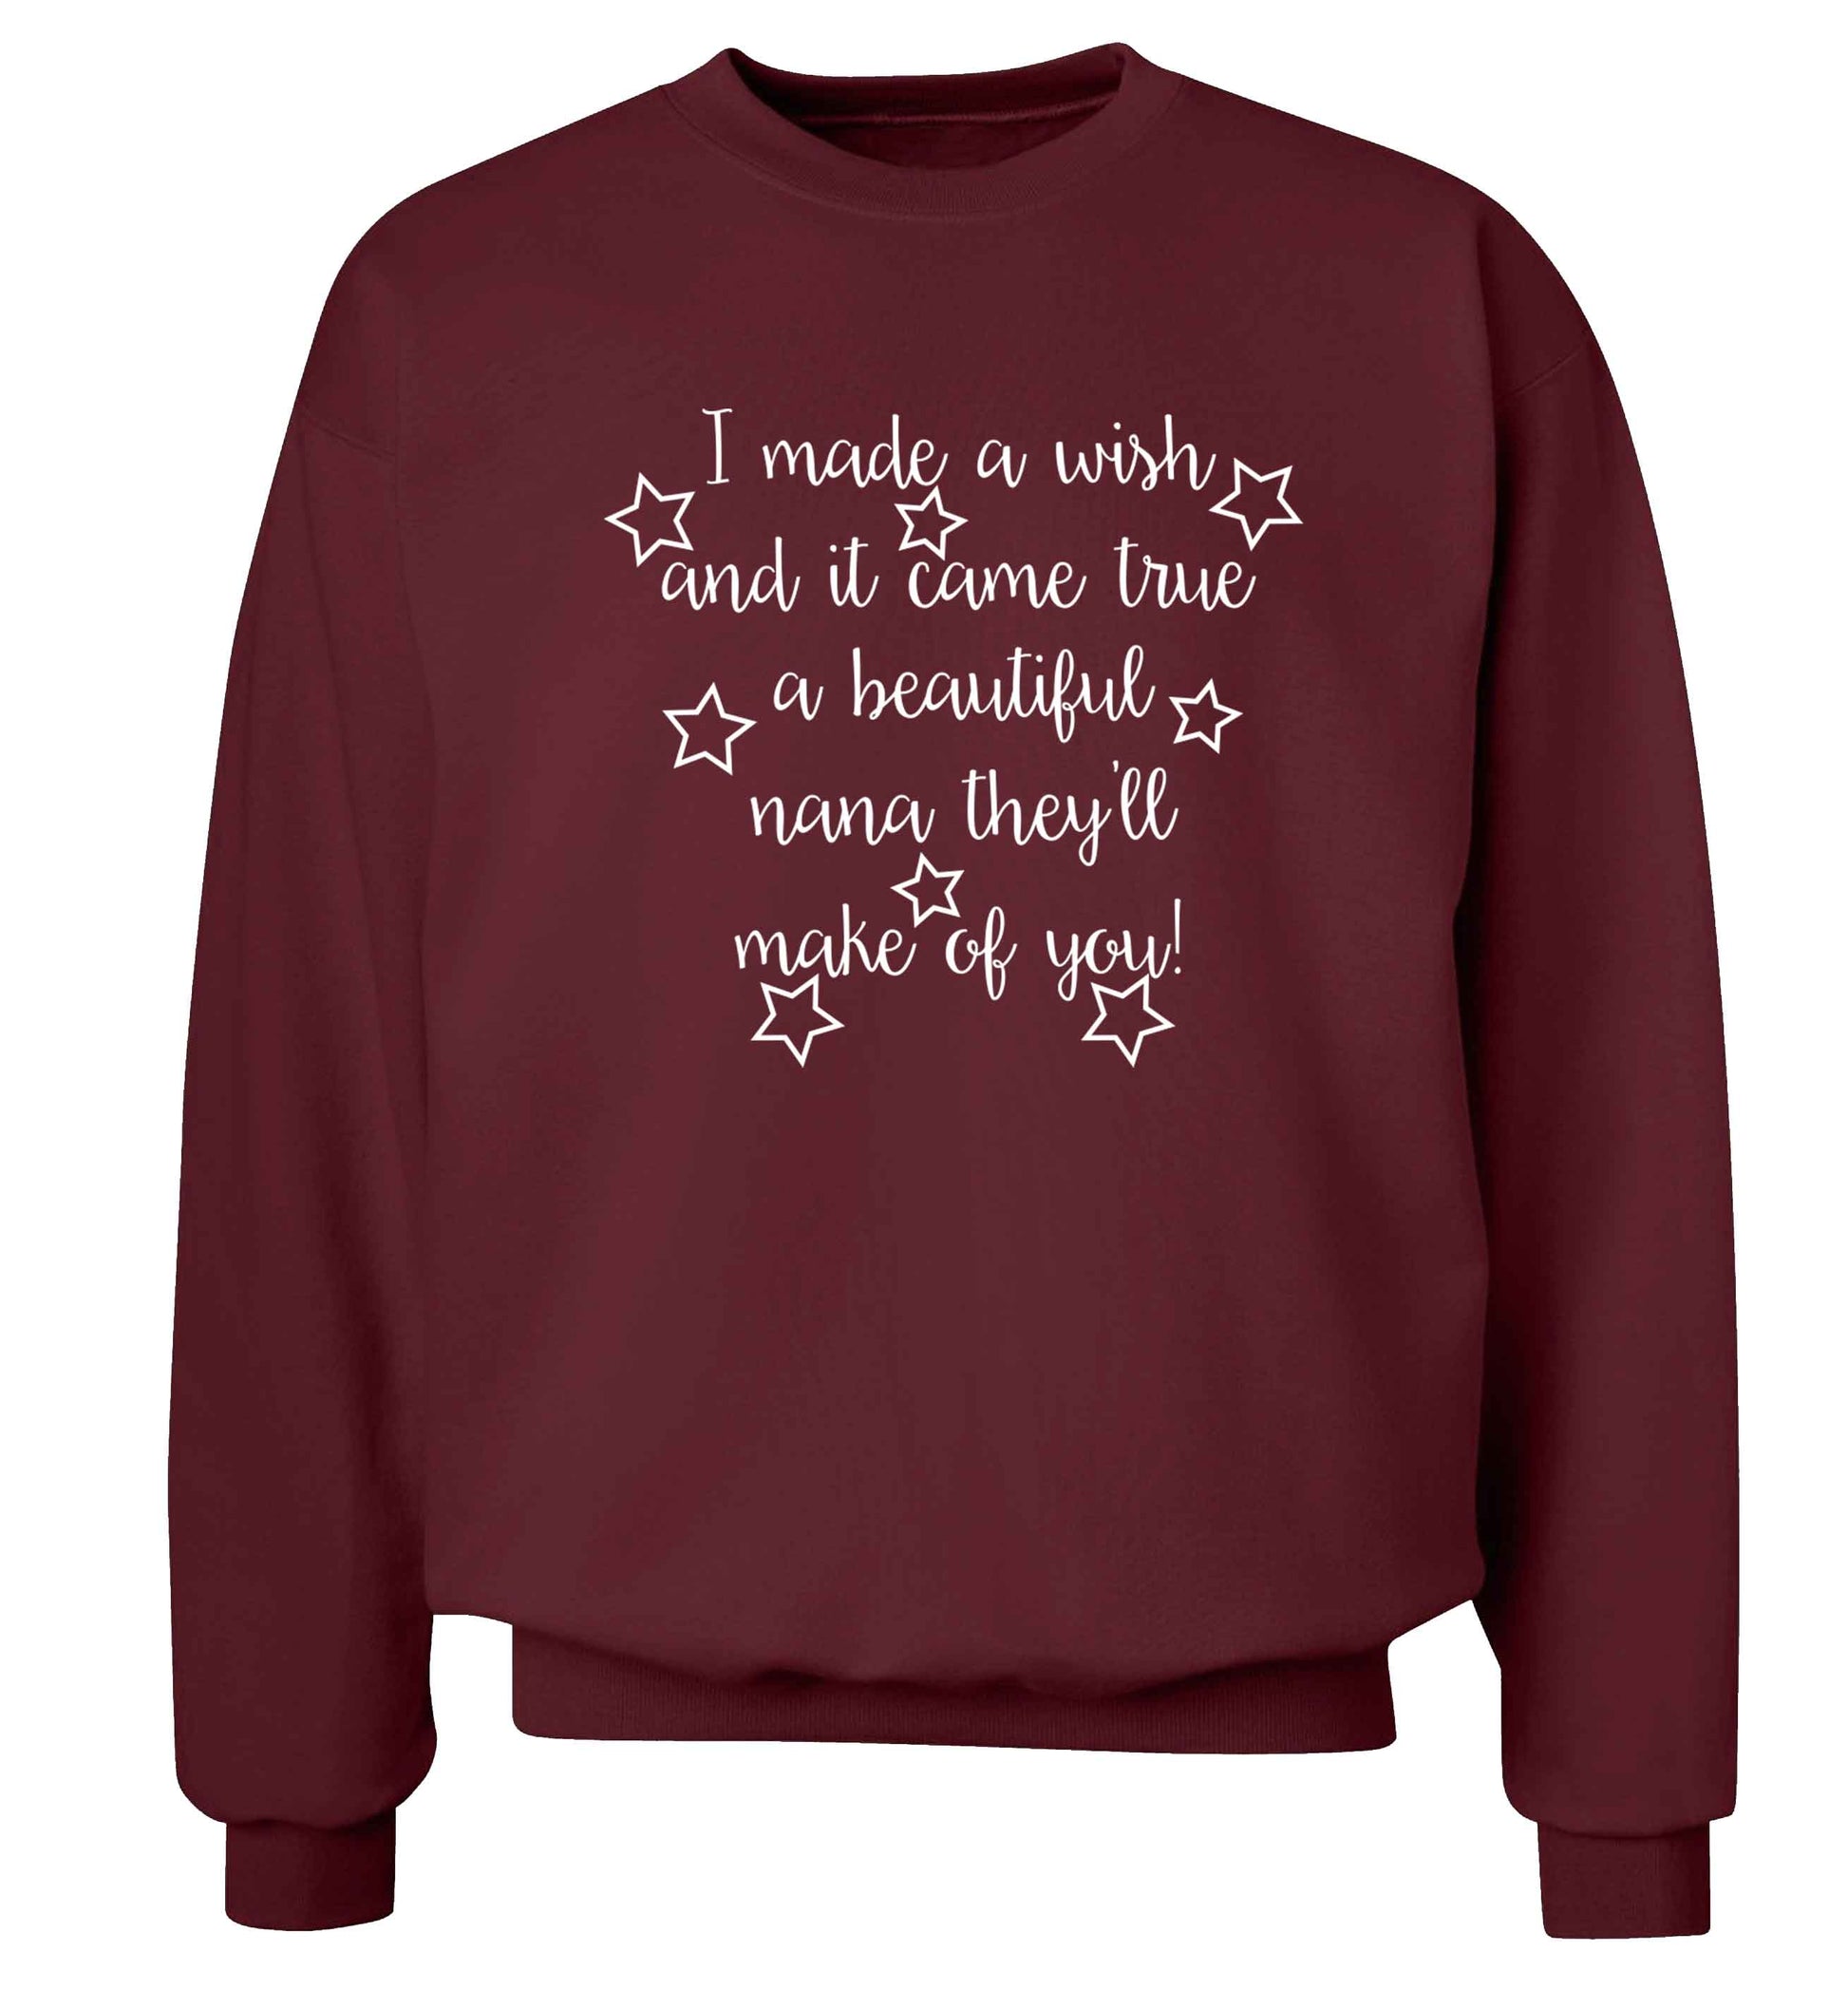 I made a wish and it came true a beautiful nana they'll make of you! Adult's unisex maroon Sweater 2XL